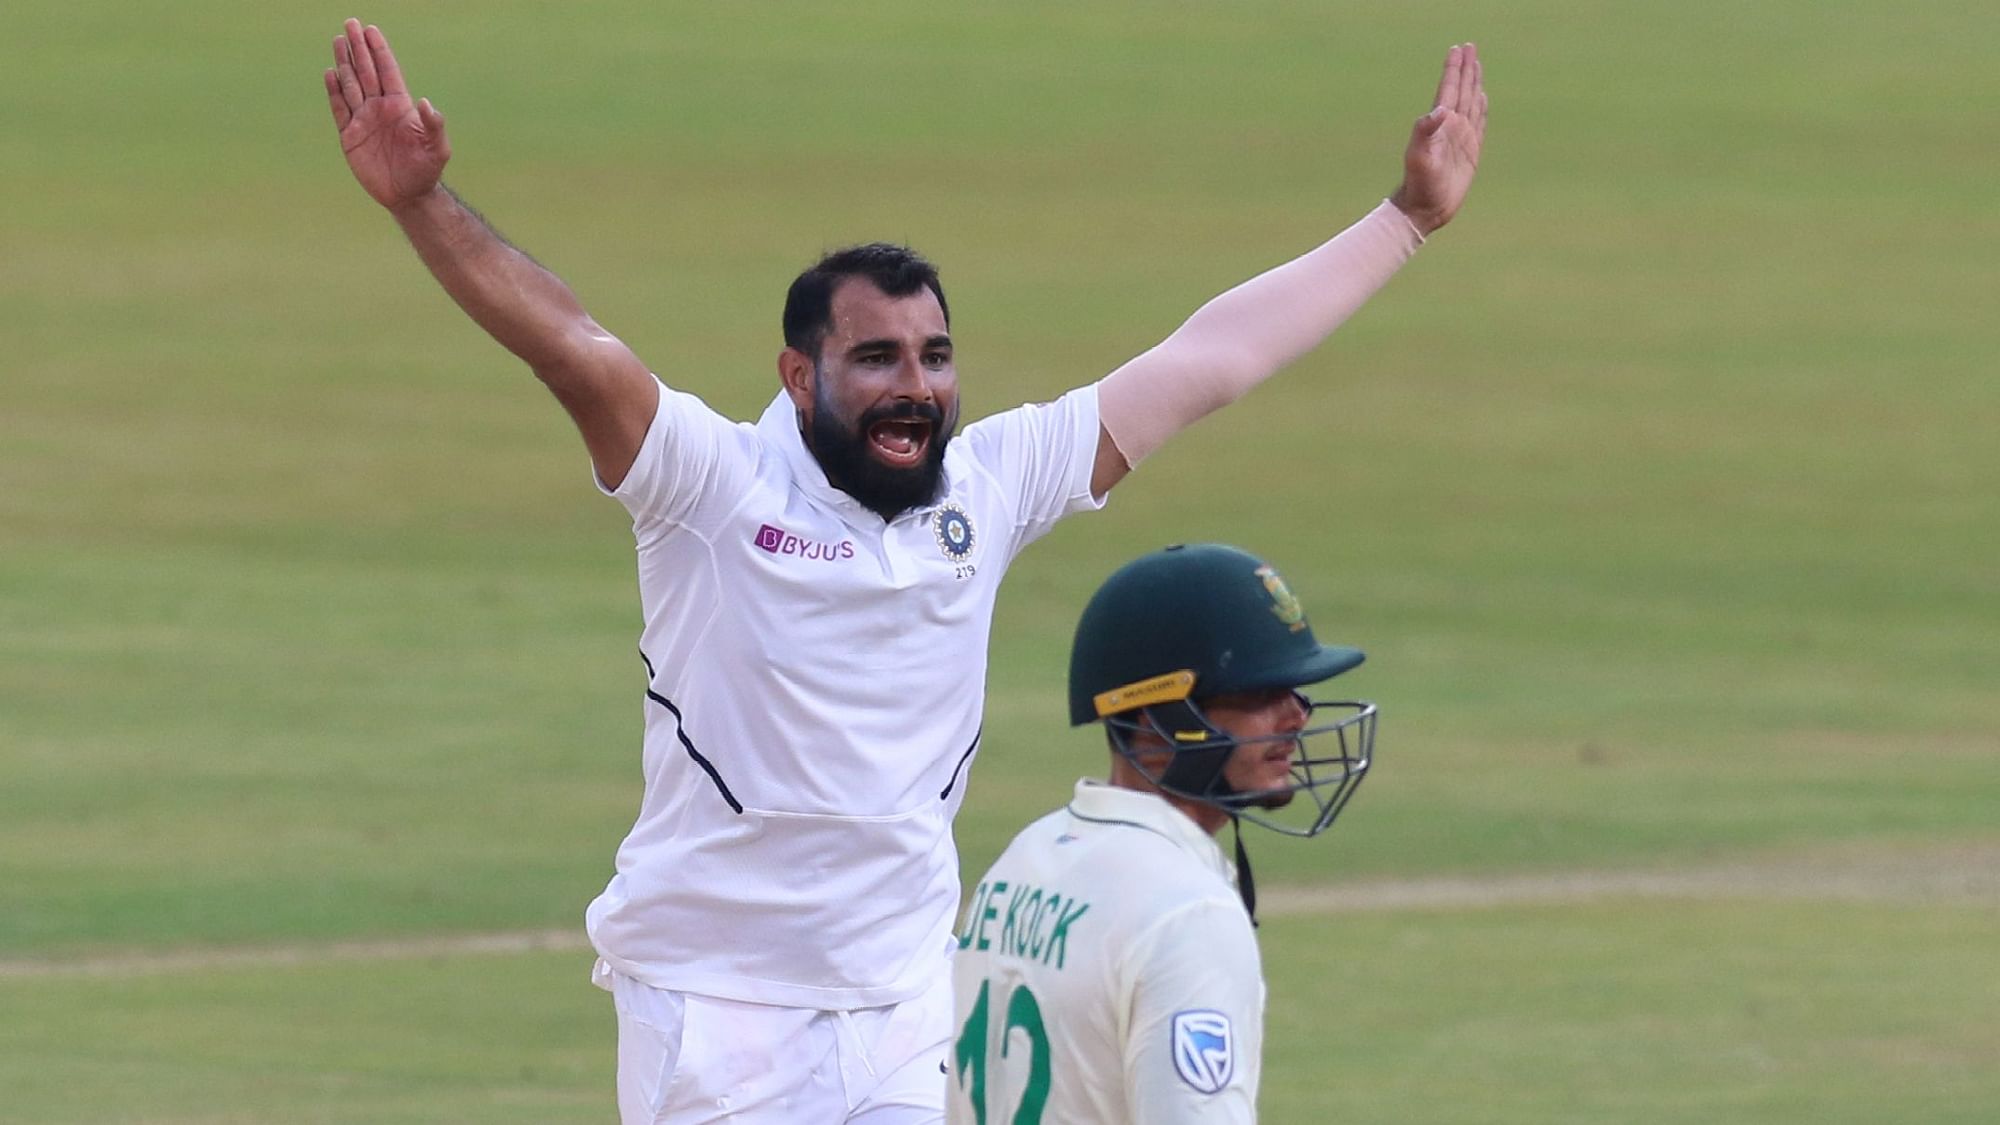 Mohammed Shami of India appeals unsuccessfully during day 3 of the first Test match between India and South Africa.